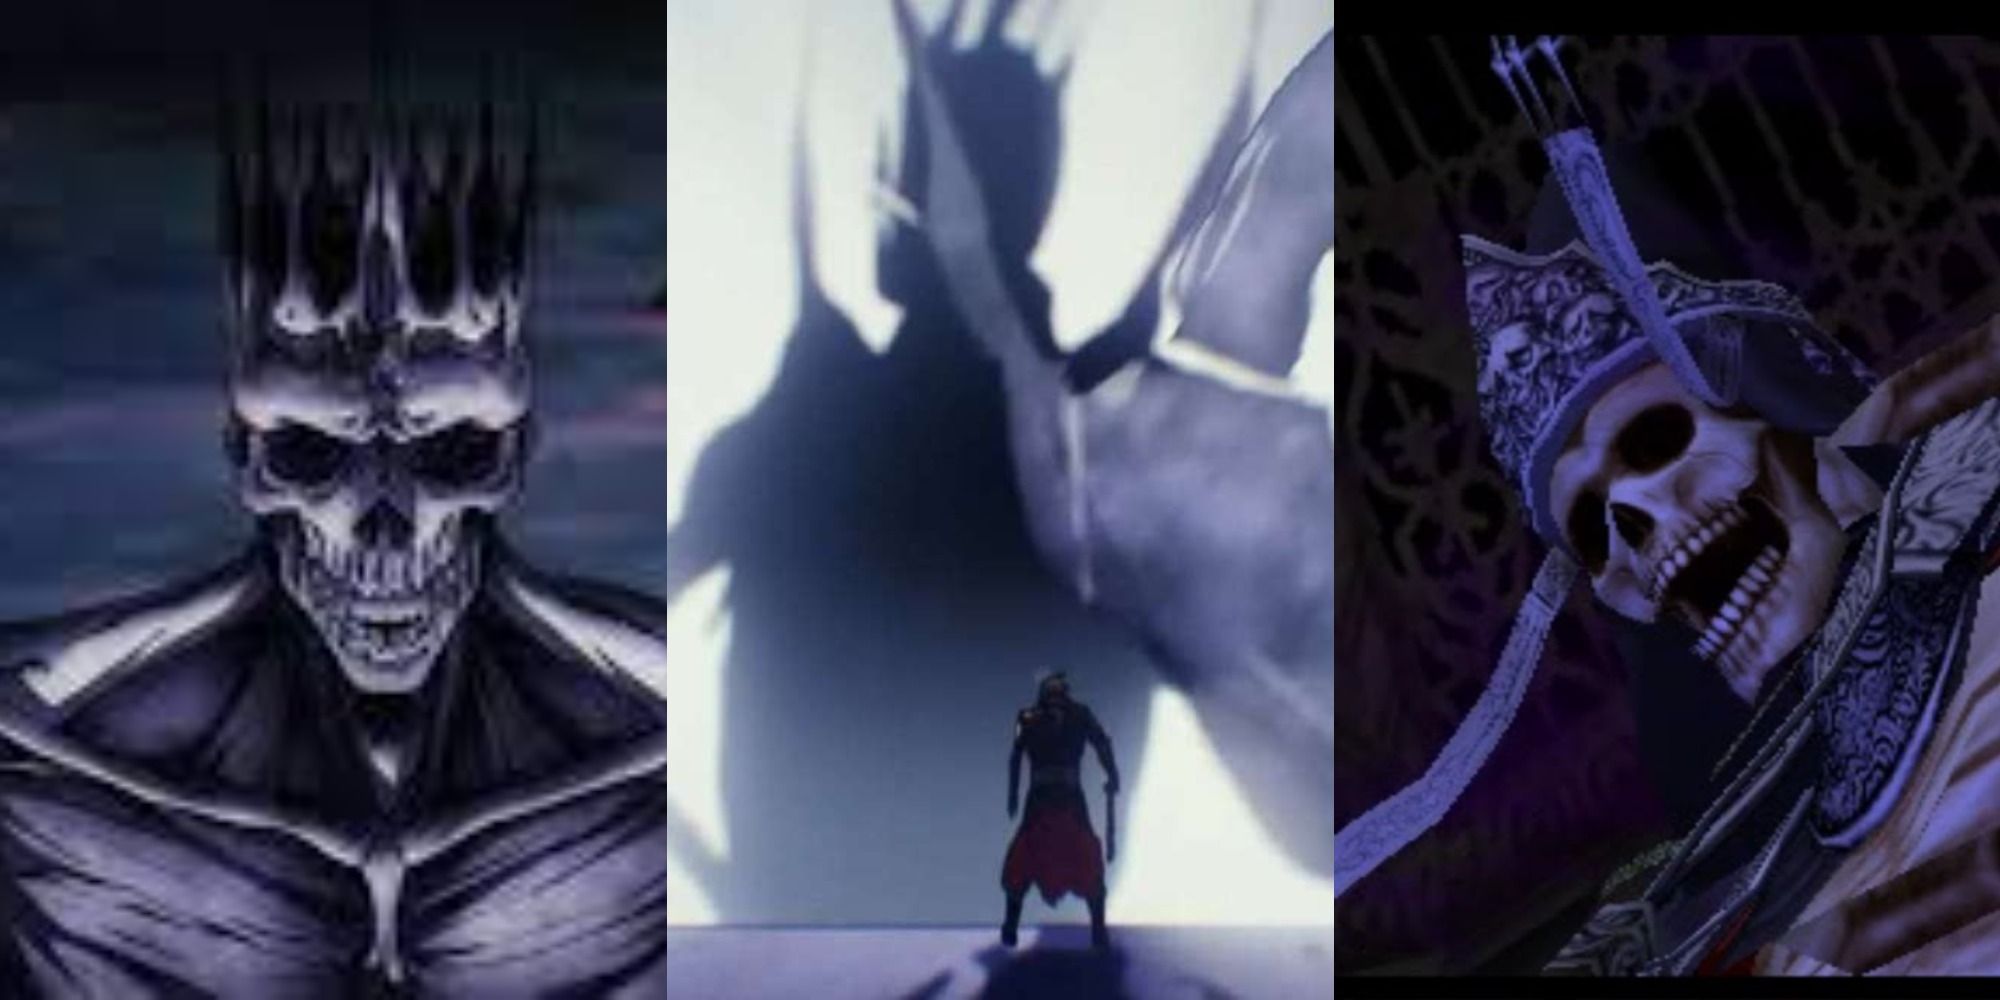 A split image of Death from the anime, Death standing in front of Trevor Belmont in the anime, and Death from the games